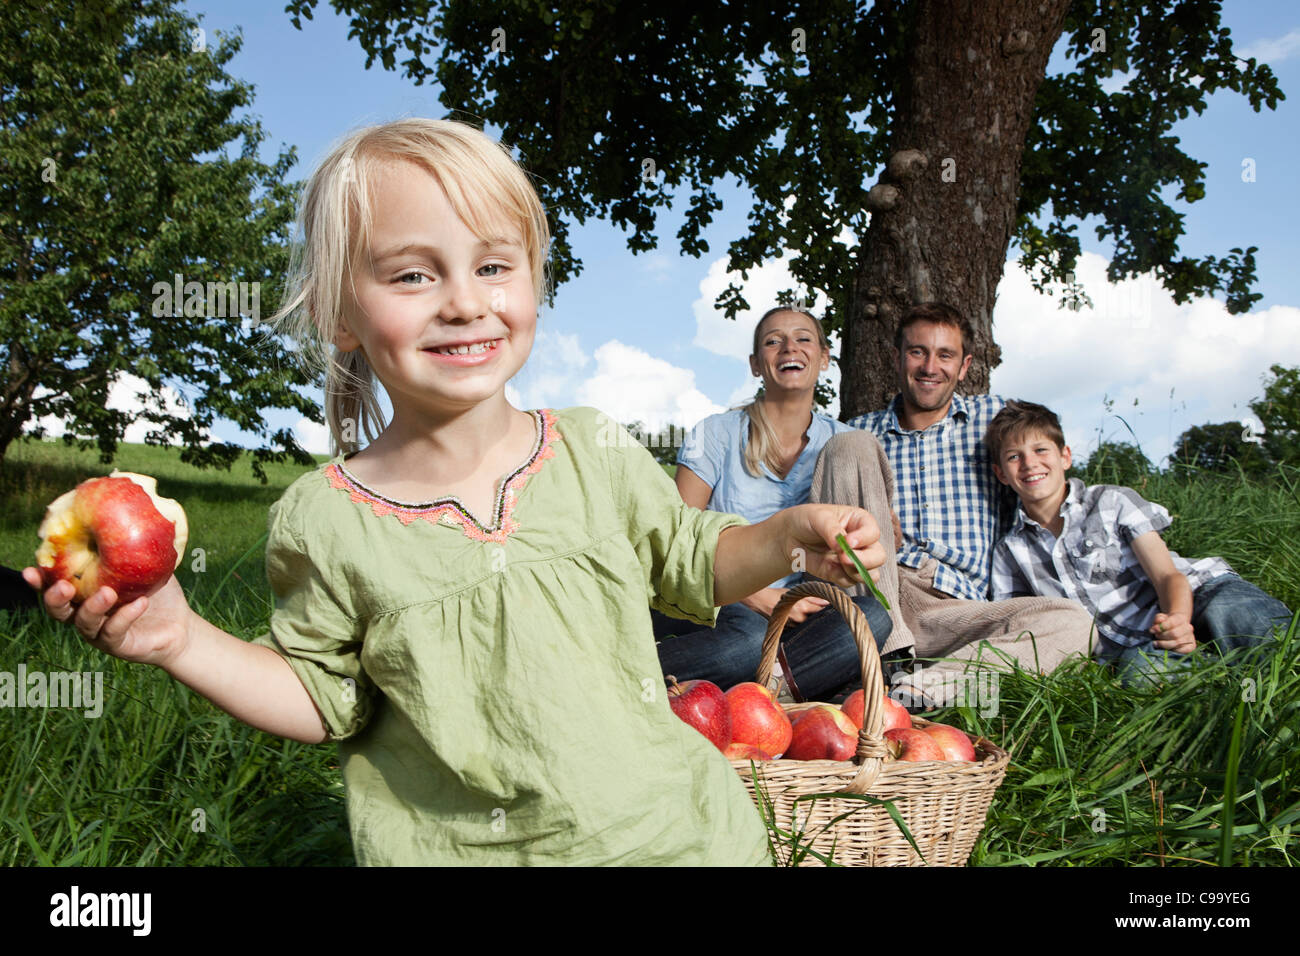 Germany, Bavaria, Altenthann,Girl with basket of apples, family with dog in background Stock Photo